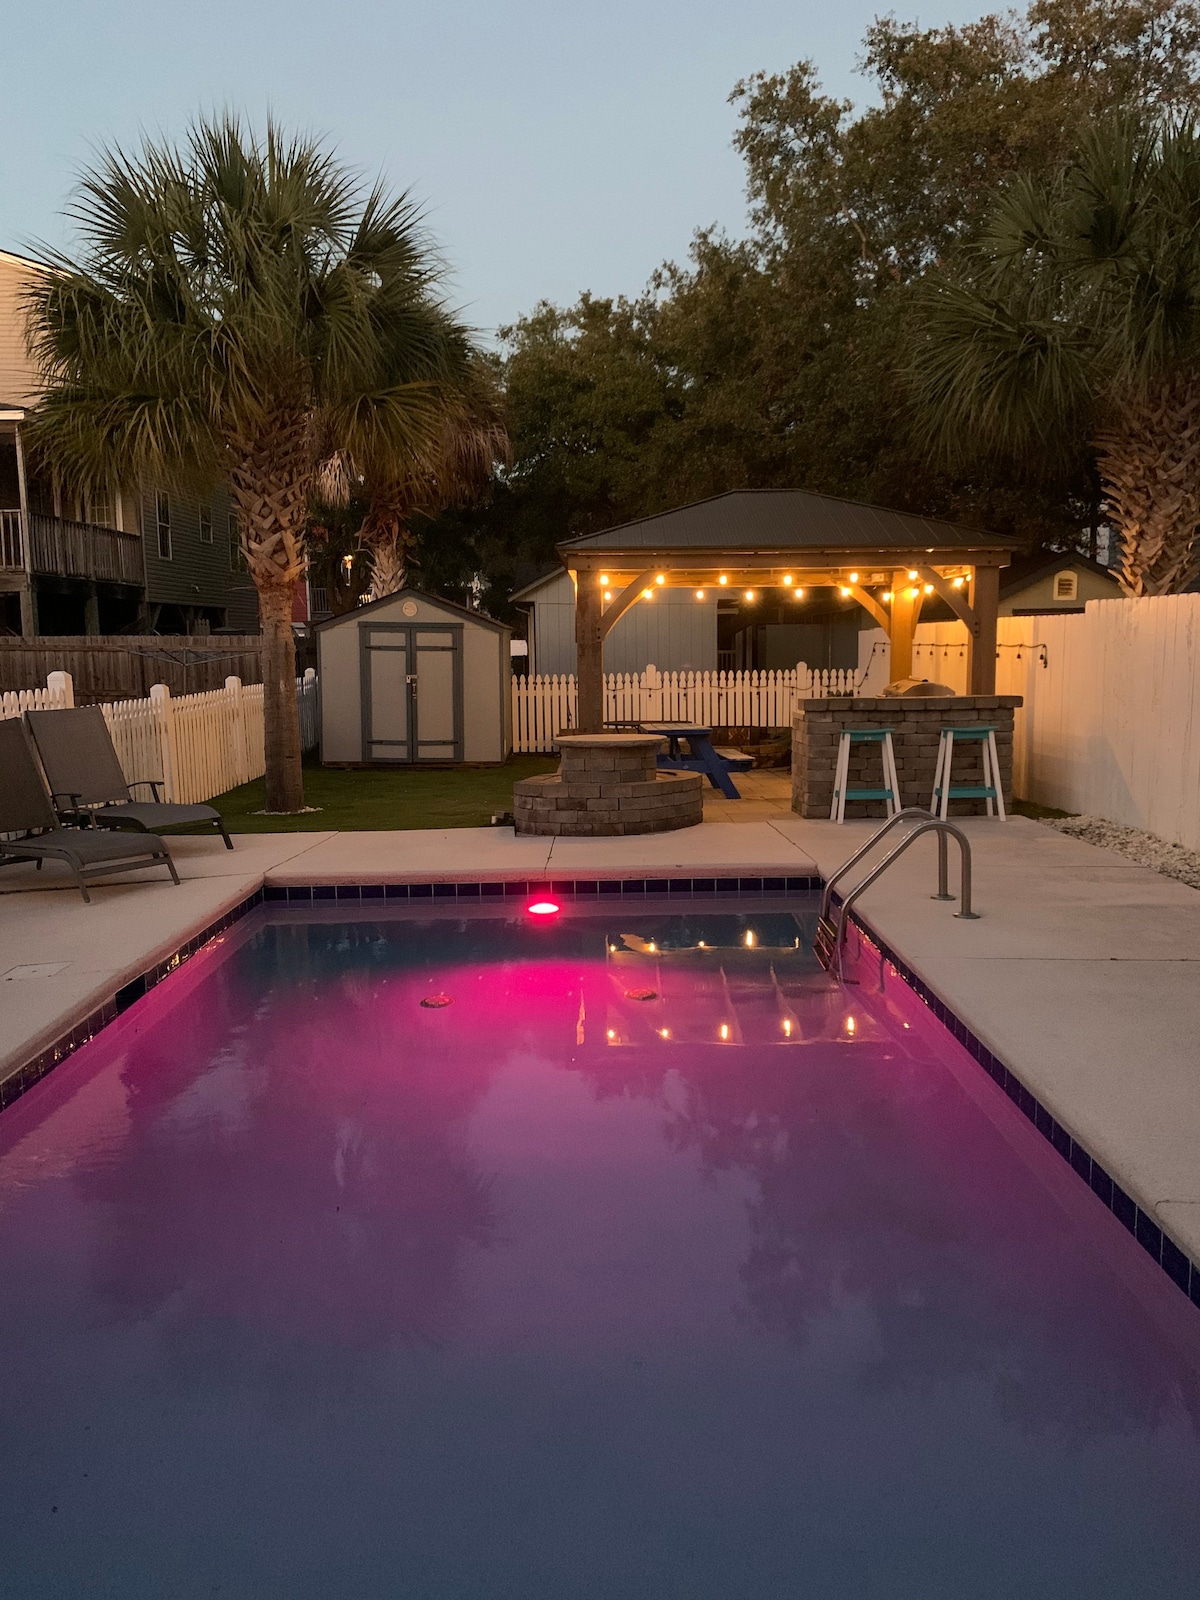 Windswept: Heated Pool, Hot Tub, and Firepit